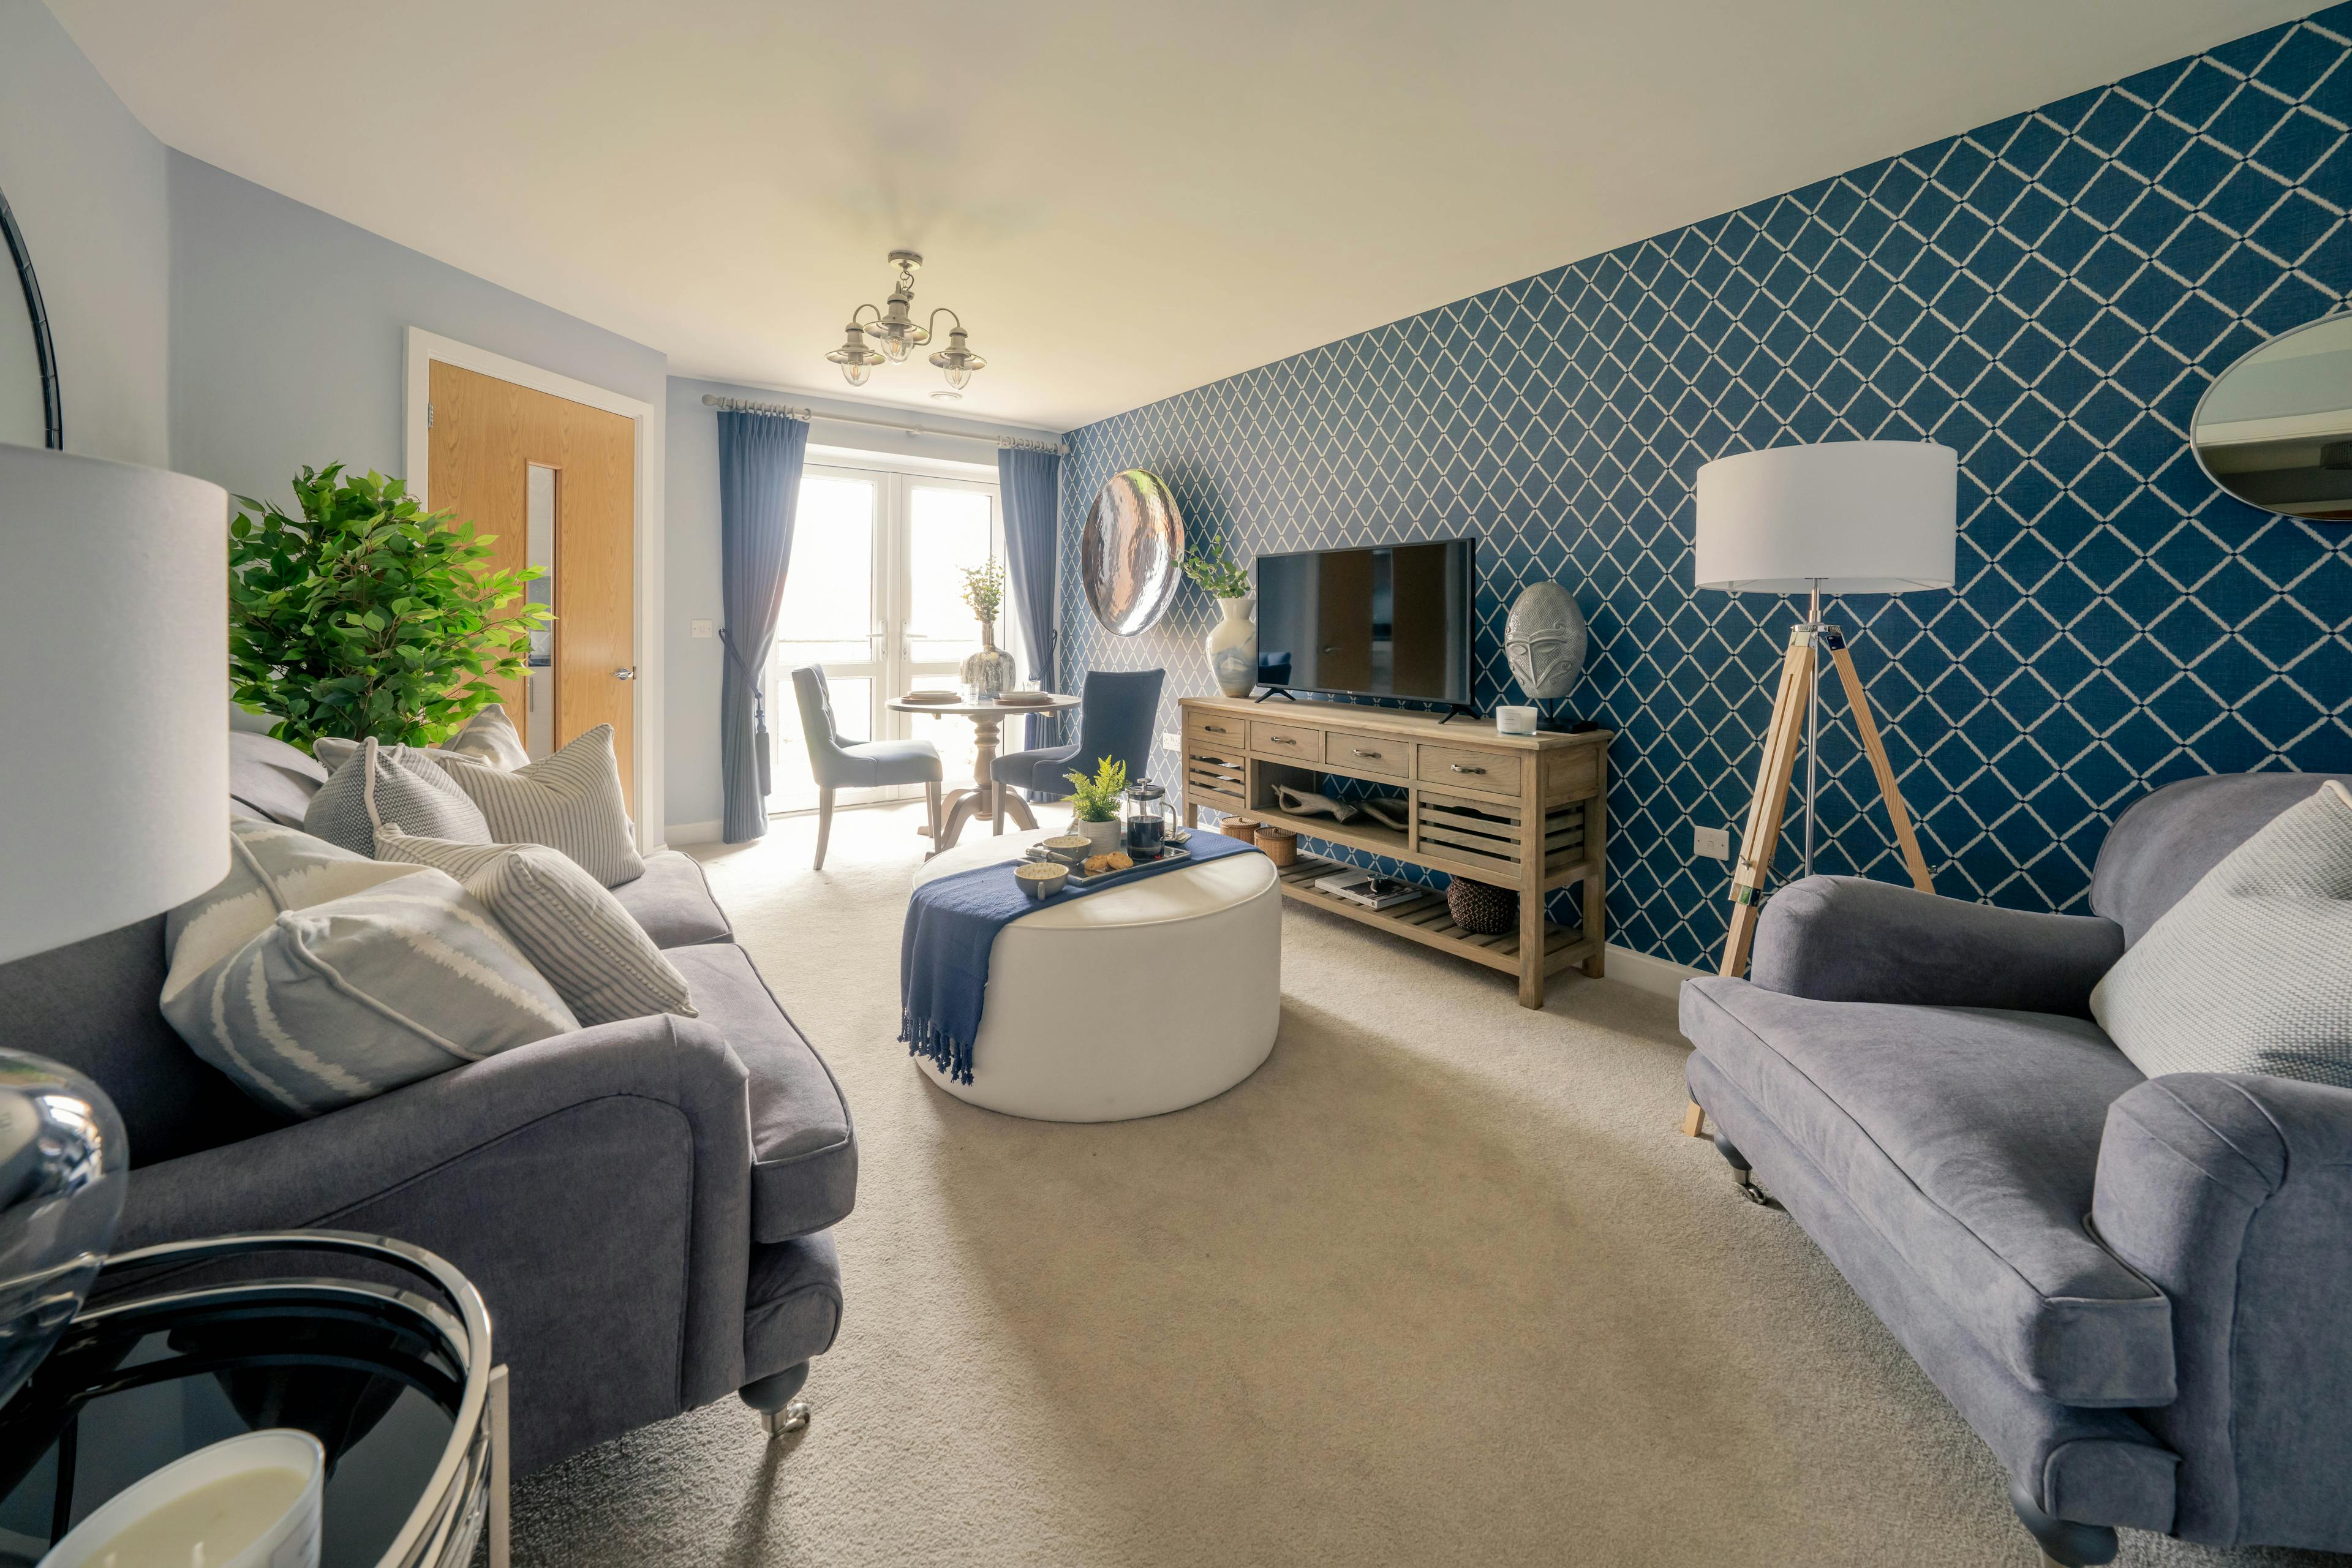 Living Room at Hamilton House Retirement Development in Patchway, Bristol